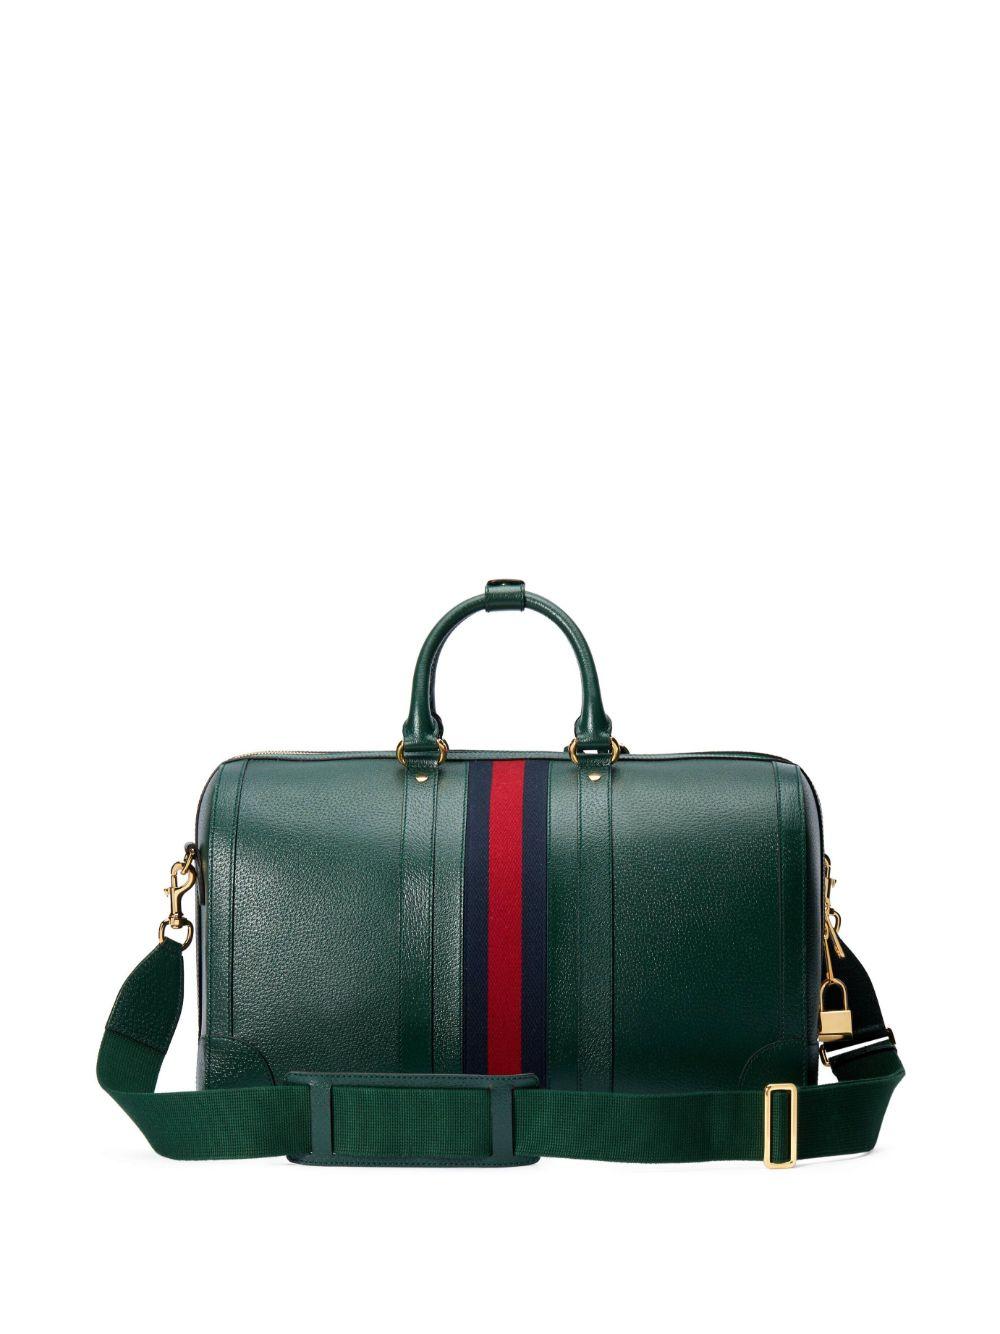 Gucci Savoy large duffle bag in green leather